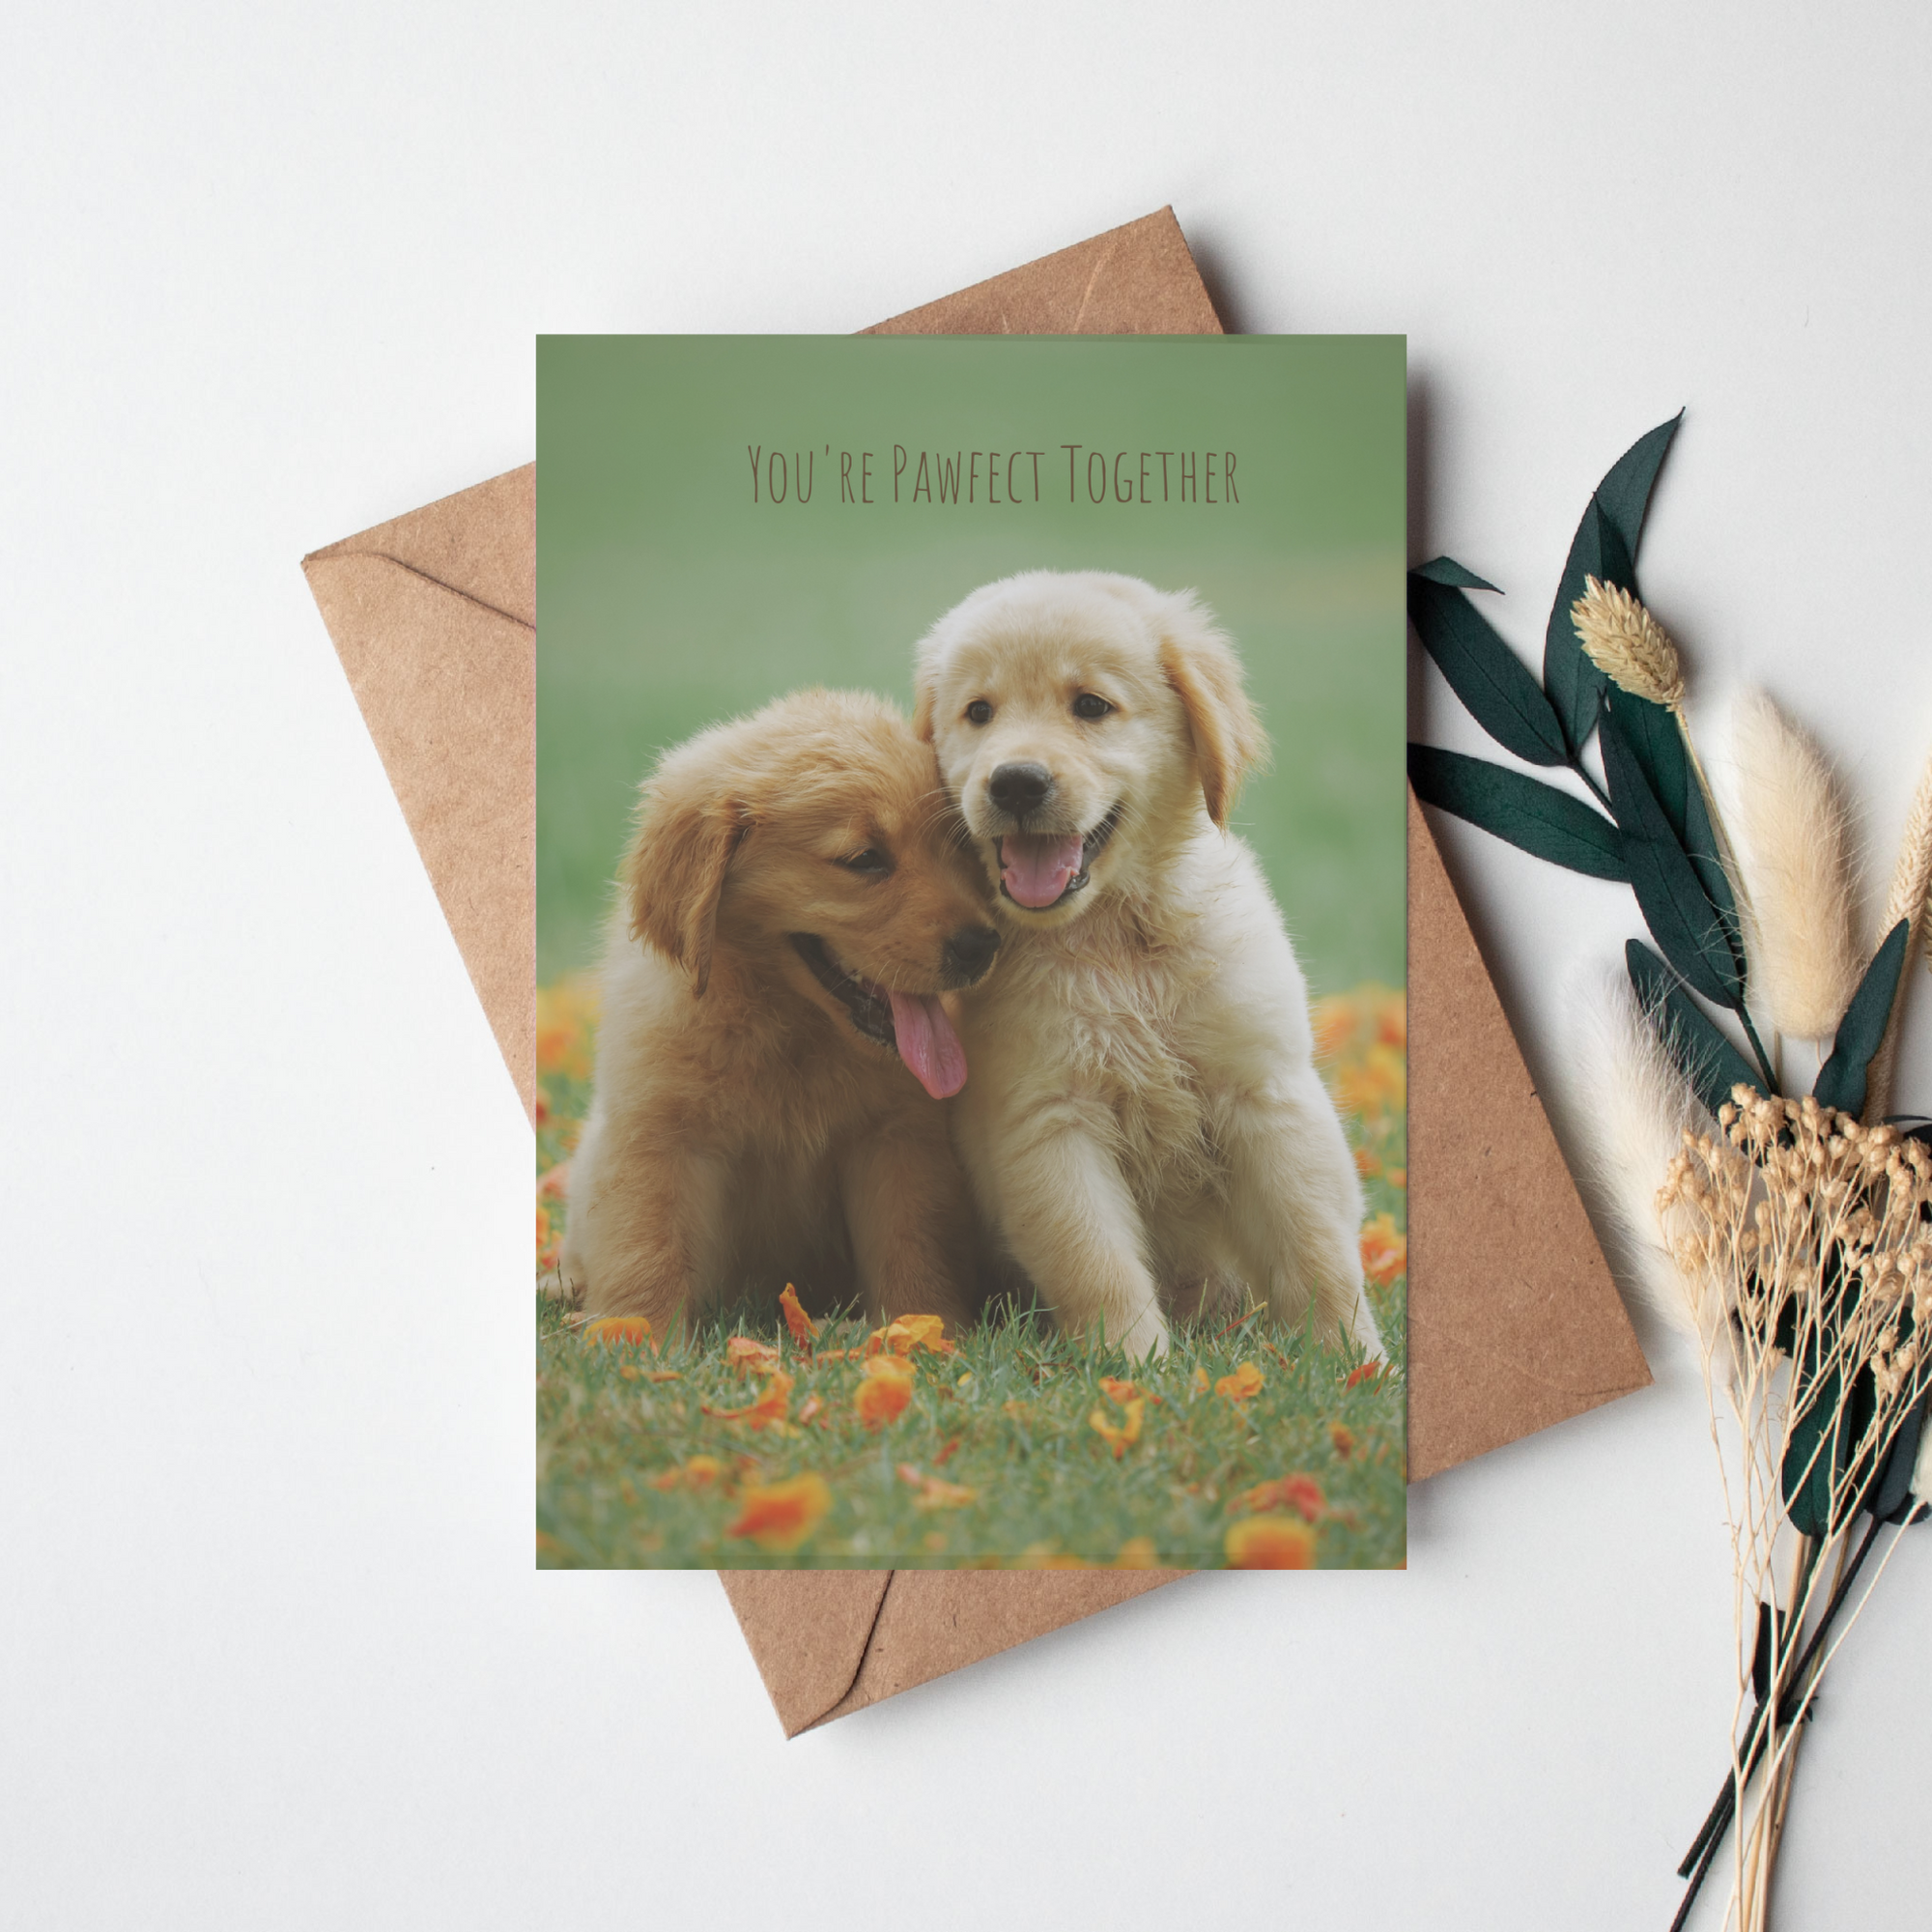 Pawfect Together Dog Greeting Card